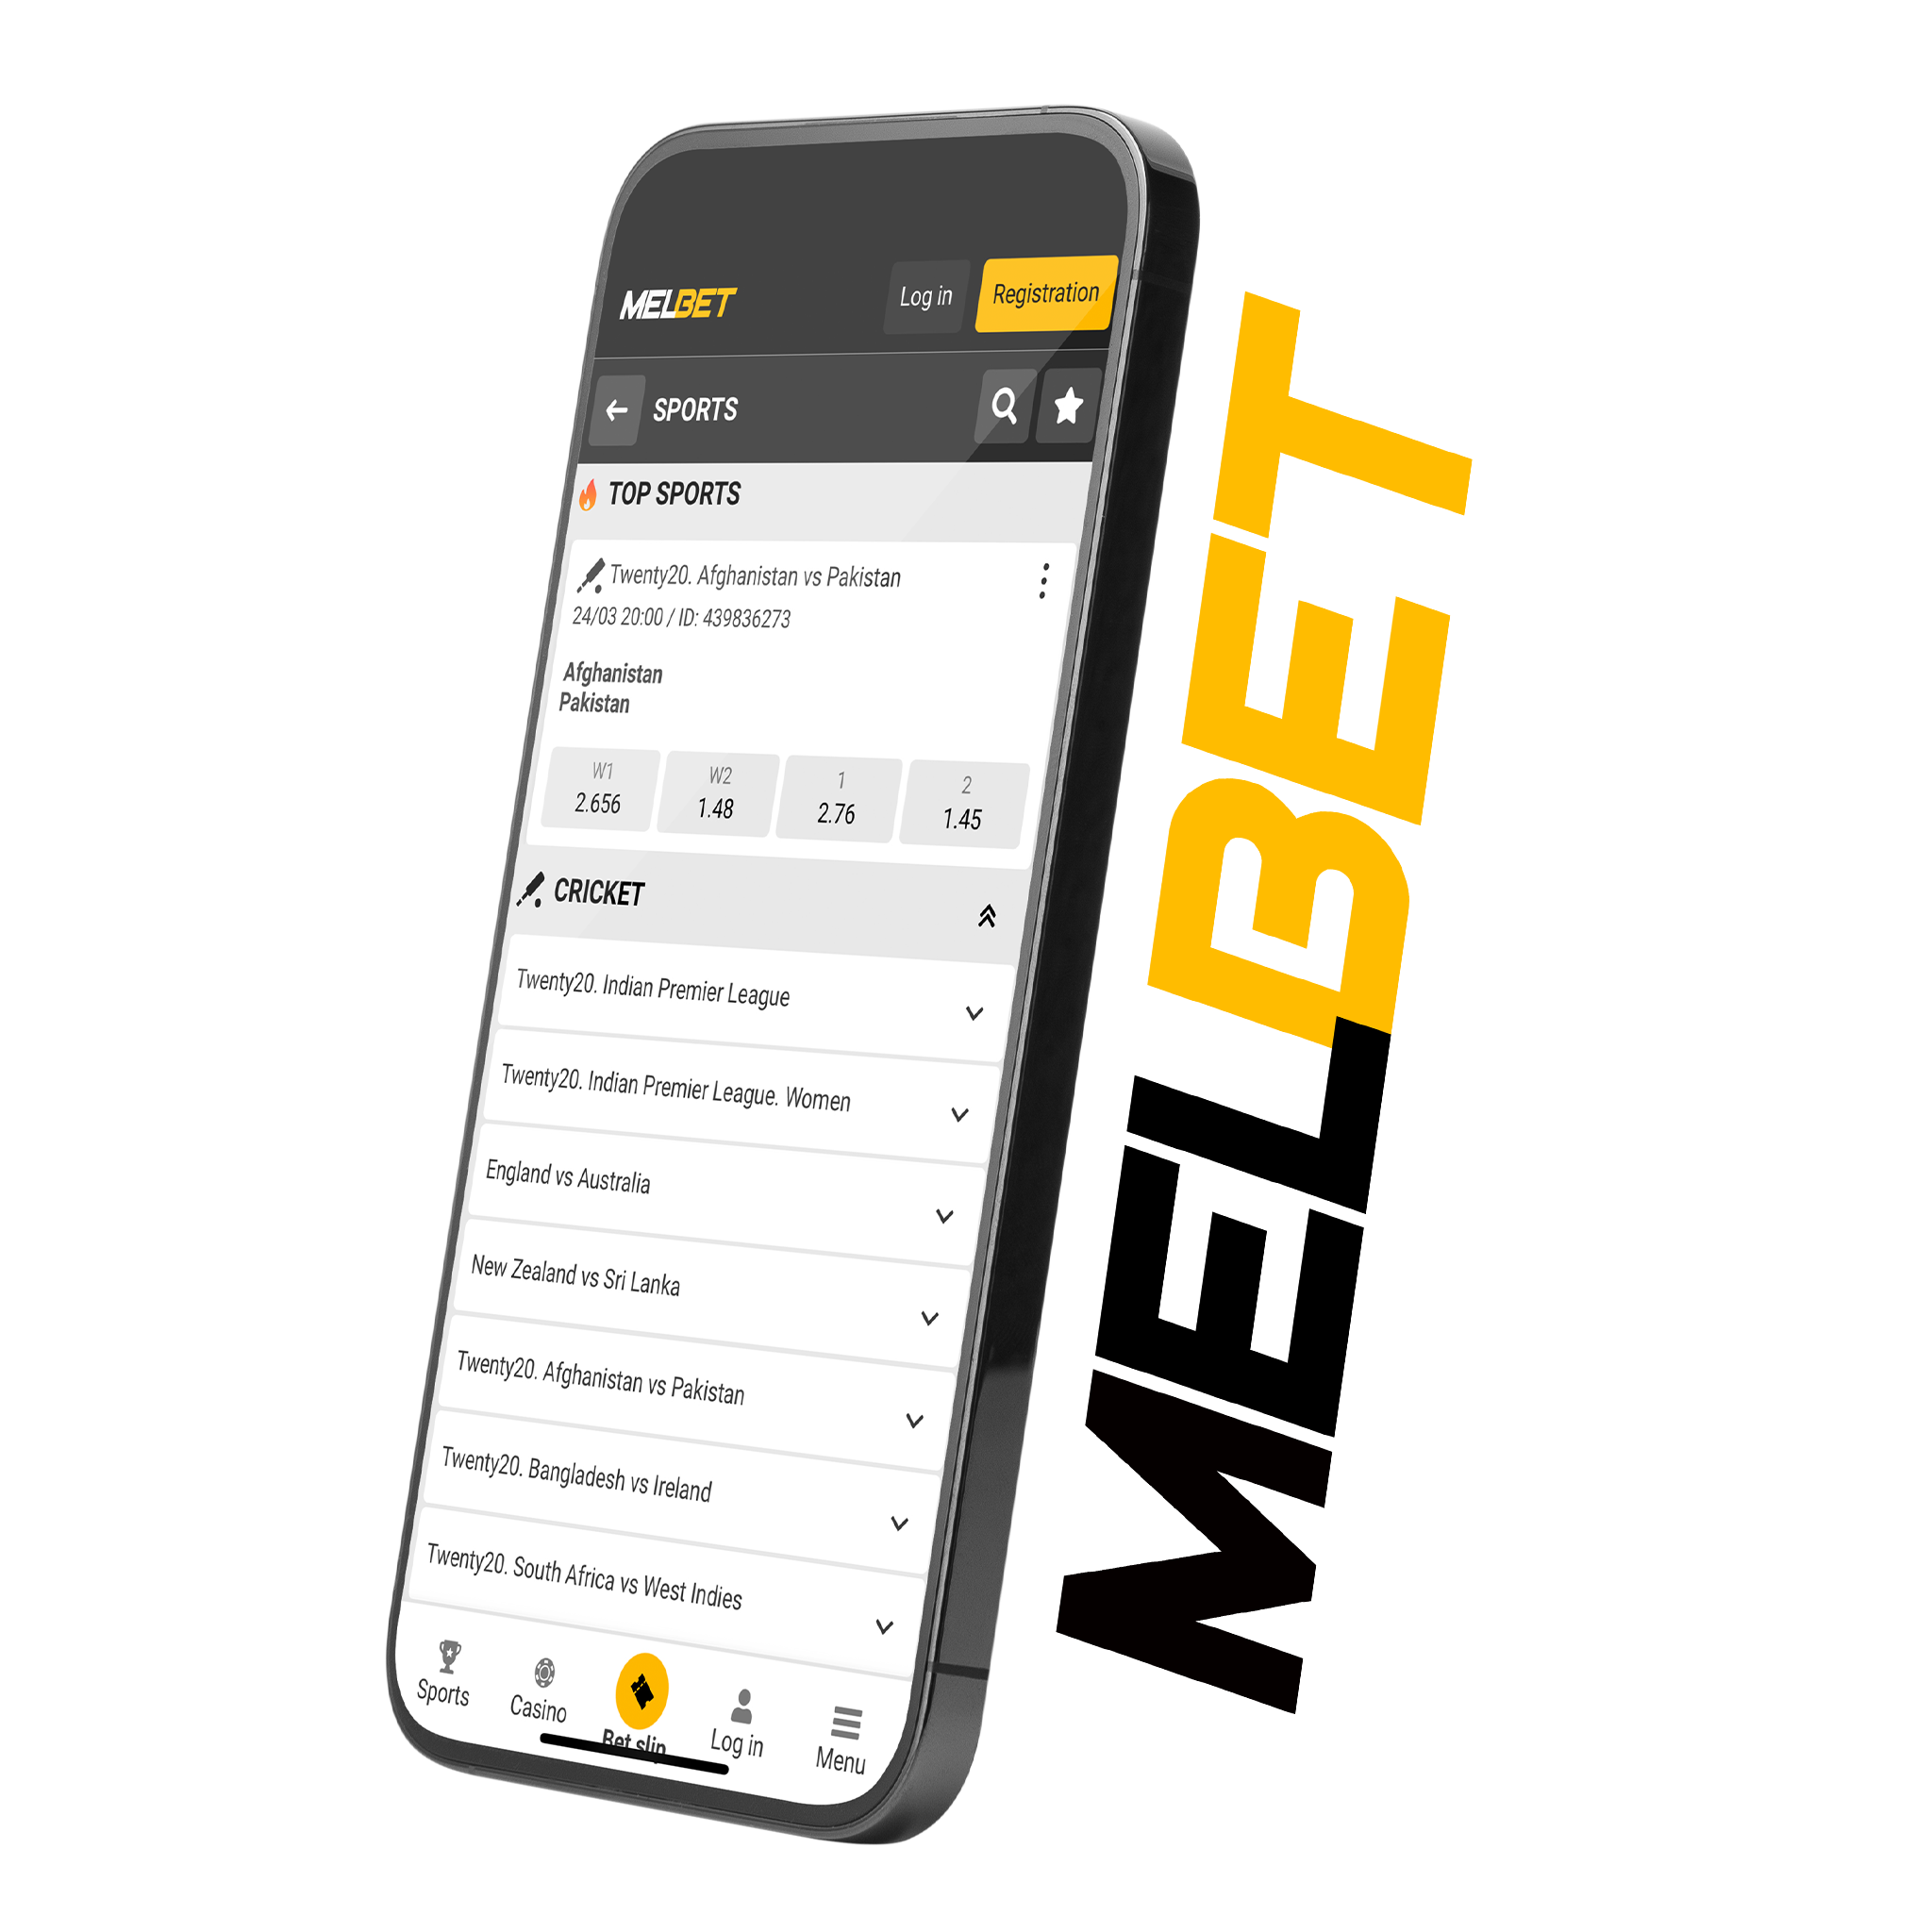 You can easily place bets on cricket in the Melbet app.